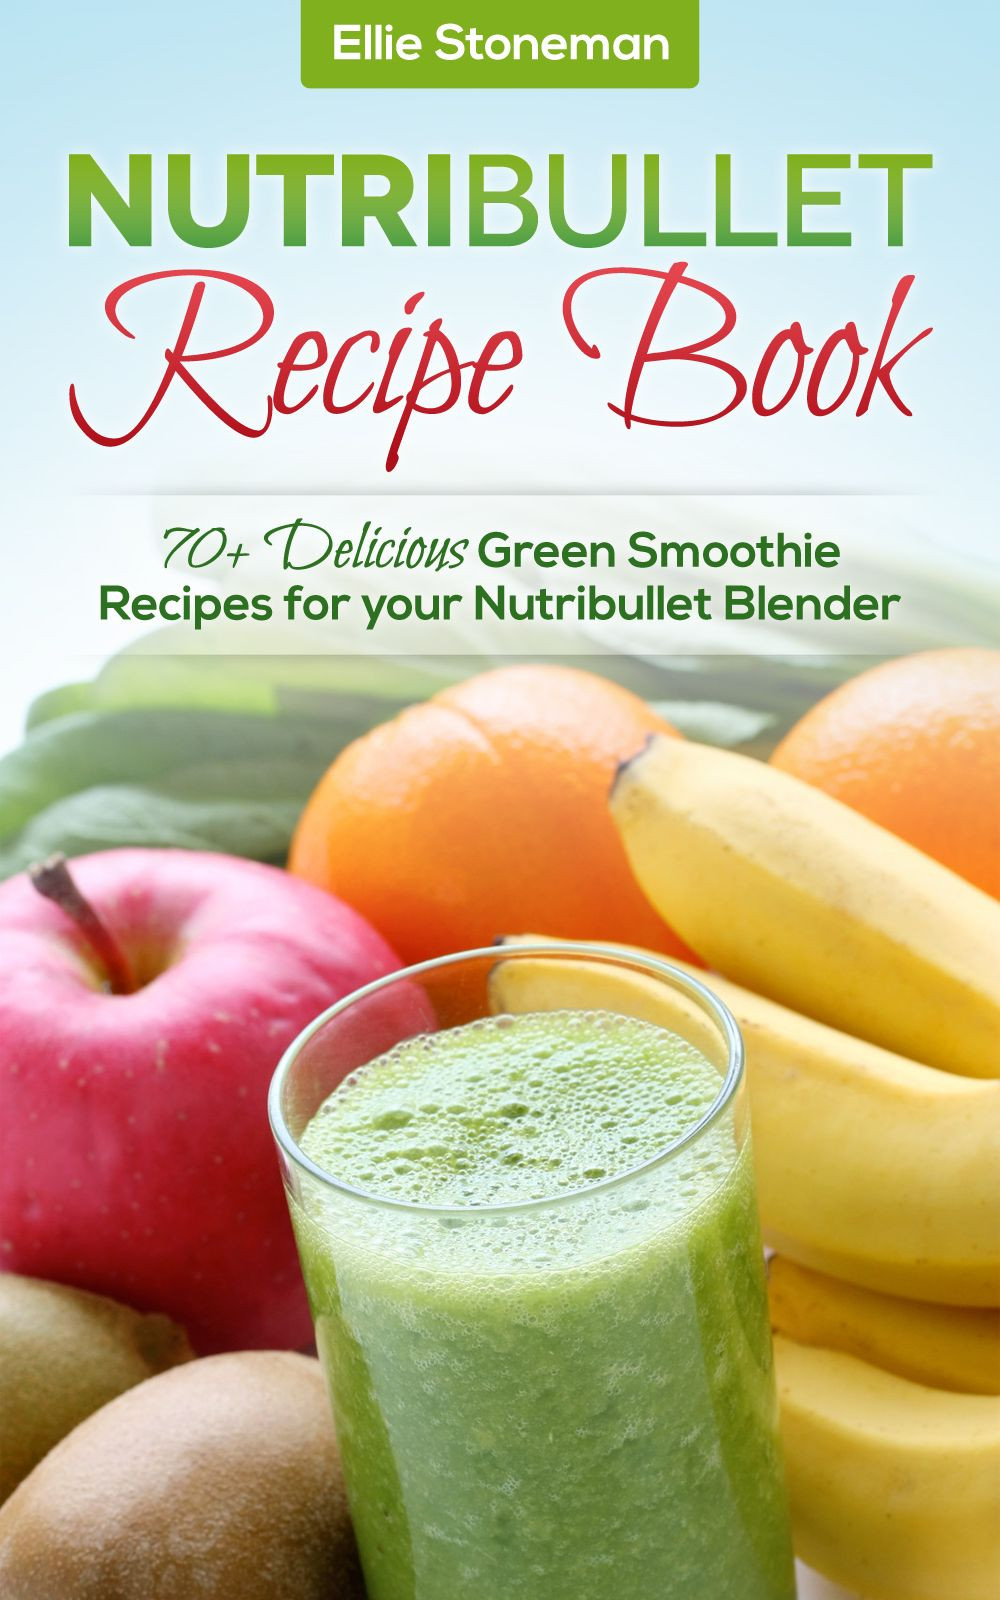 Magic Bullet Recipes For Weight Loss
 Nutribullet and Magic Bullet Recipes for Weight Loss